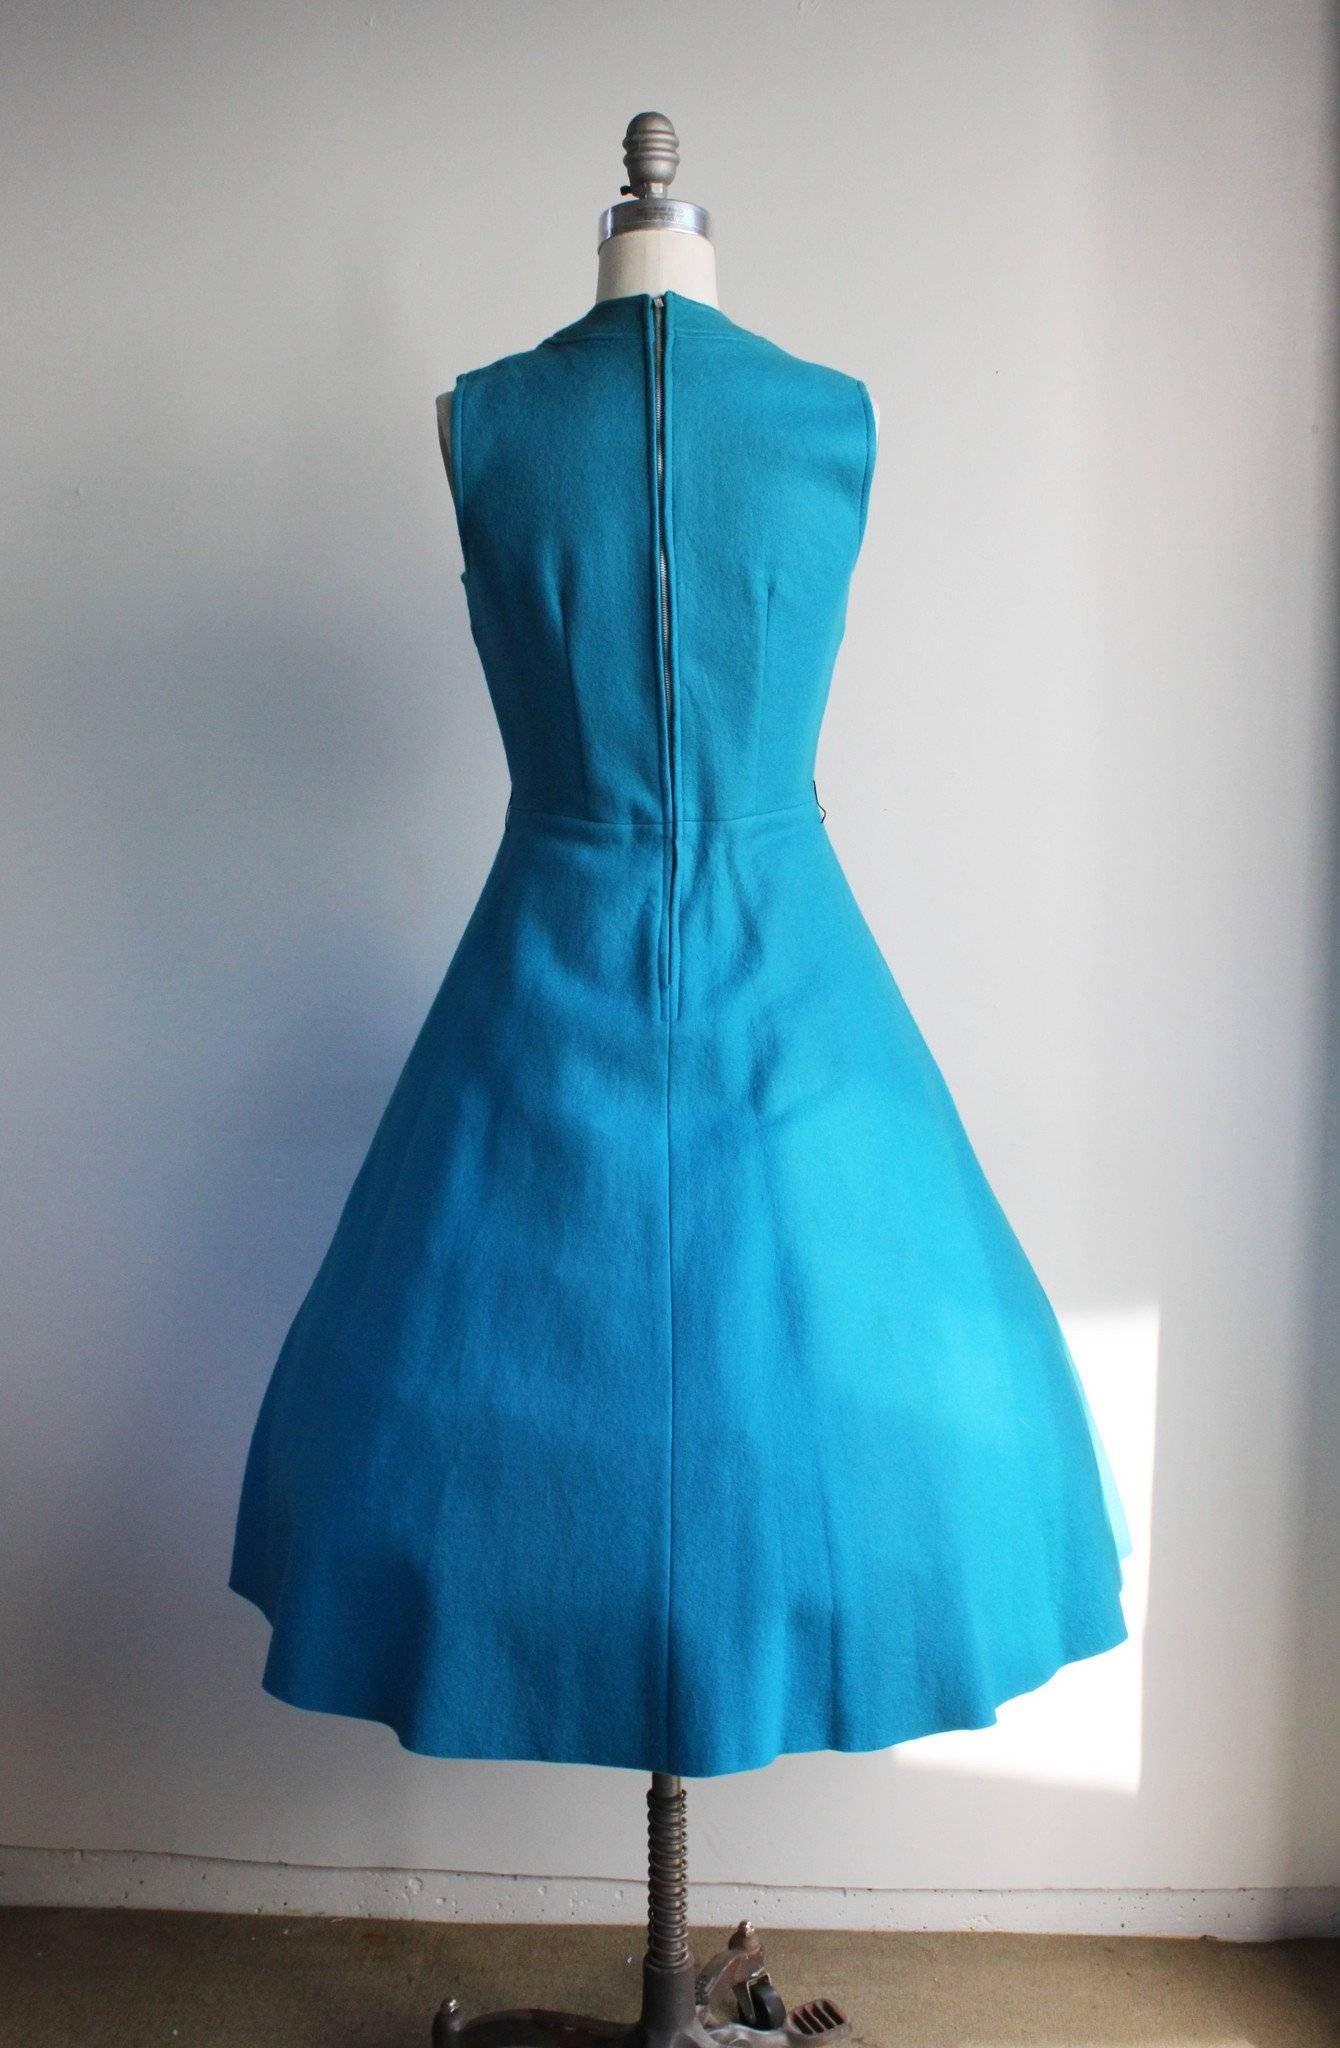 Vintage 1960s Blue Felt Dress With Oversize Buttons-Toadstool Farm Vintage-1950s,50s,Blue,Circle Skirt,Clothing,Dress,Felt,Fit And Flare,Full Circle,New Look,Peacock,Vintage